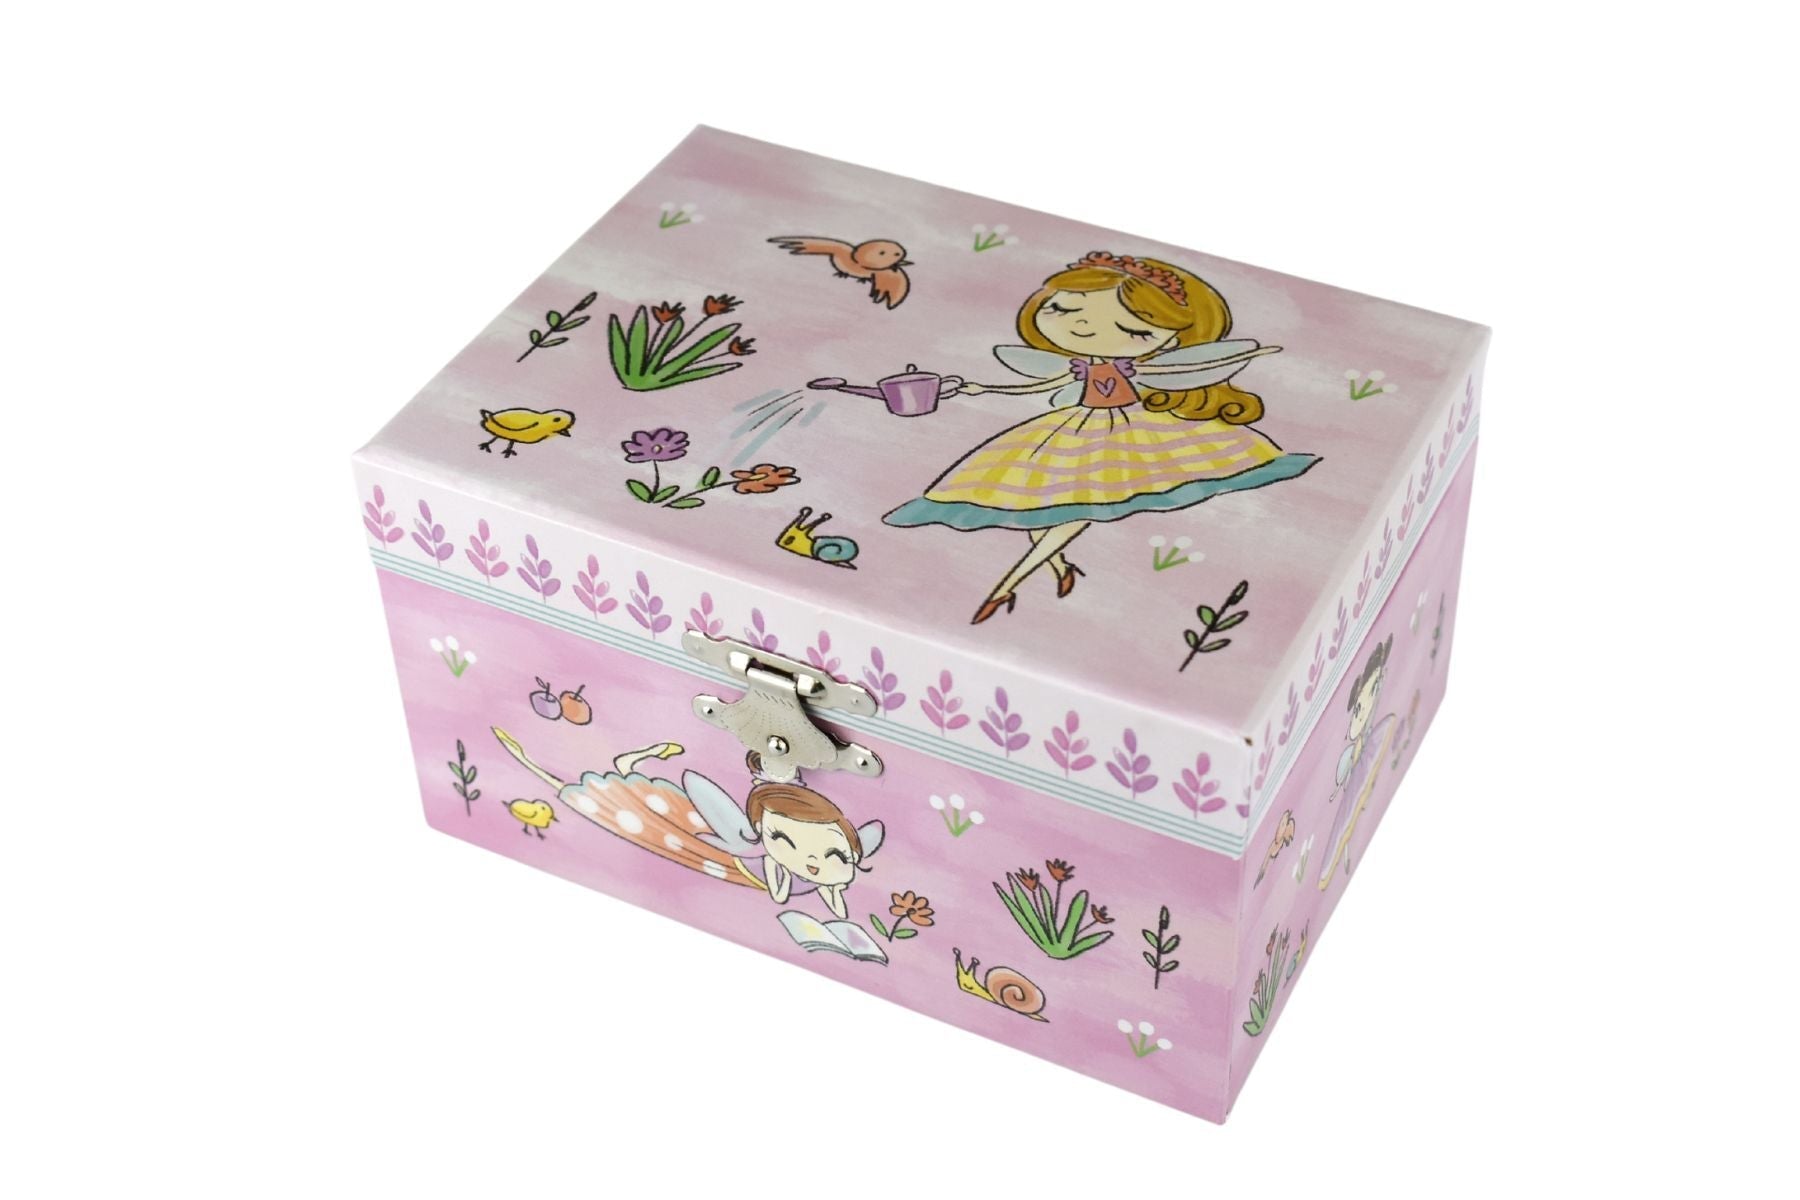 Top View of Lilly Fairy Keepsake Music Box